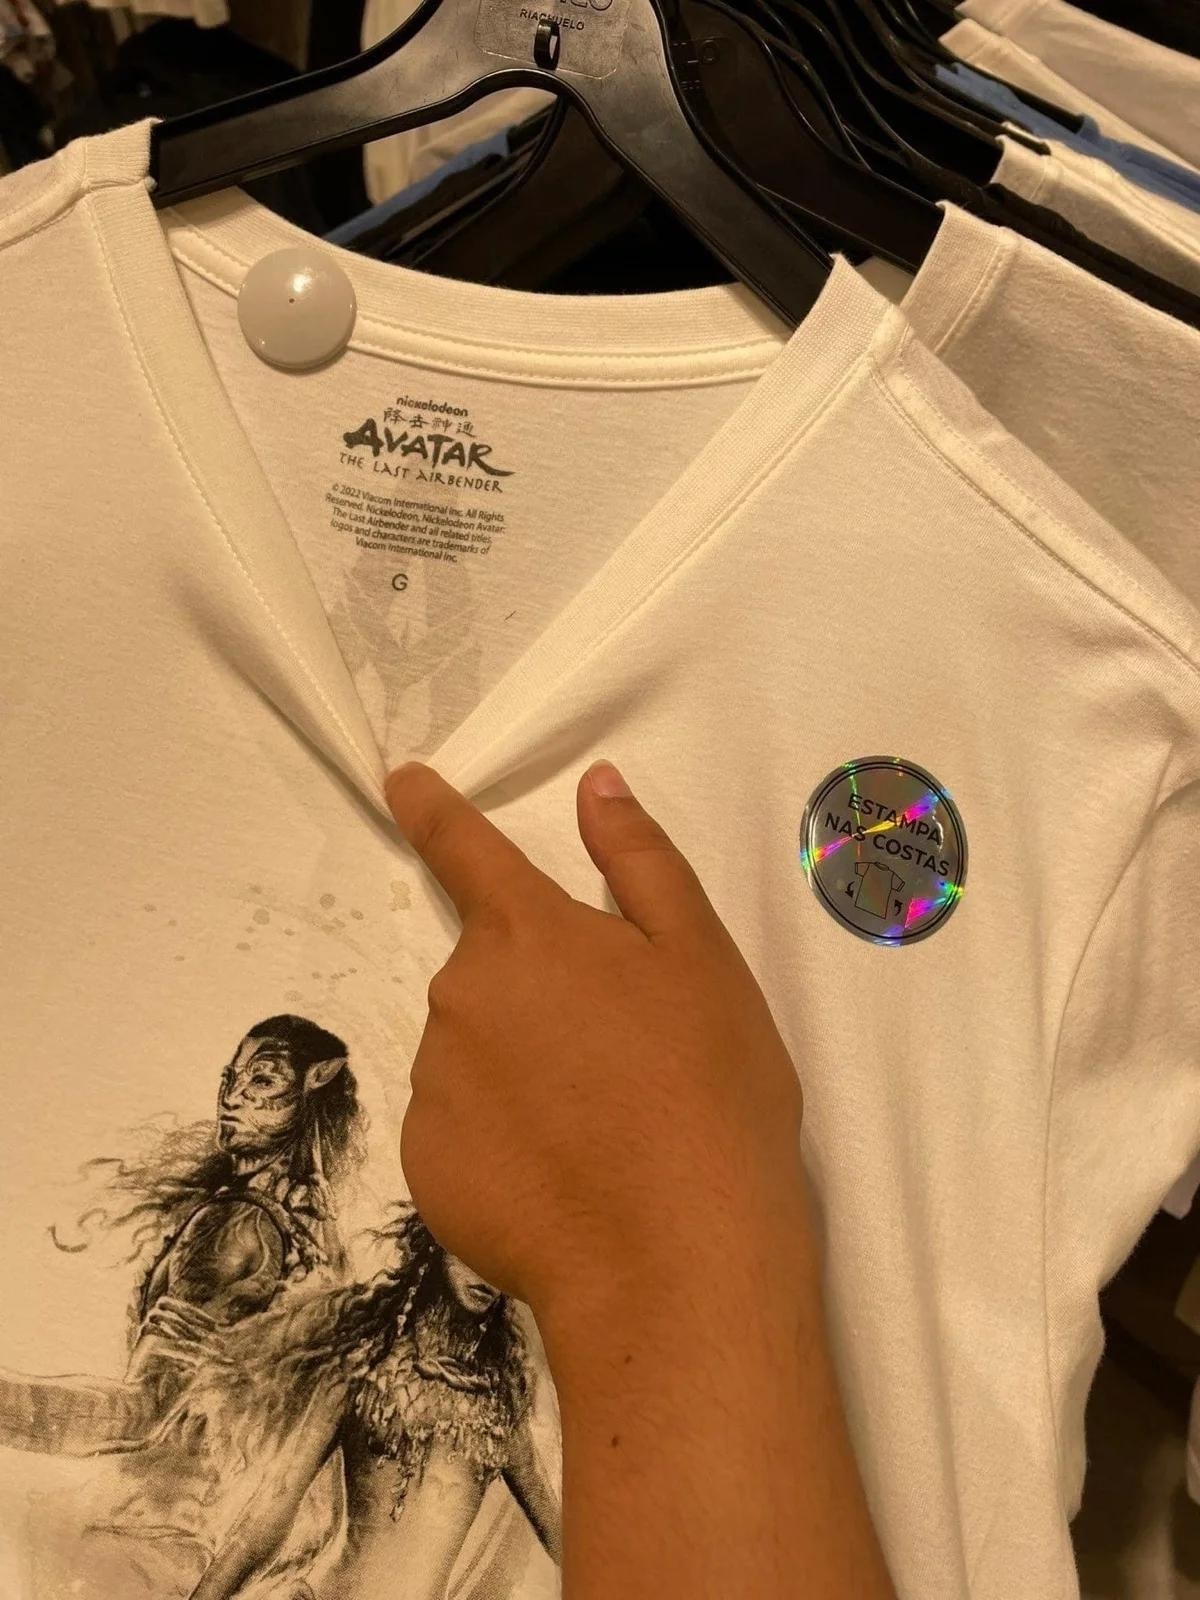 Avatar, the Last Airbender on the label of a T-shirt with images of Avatars on it